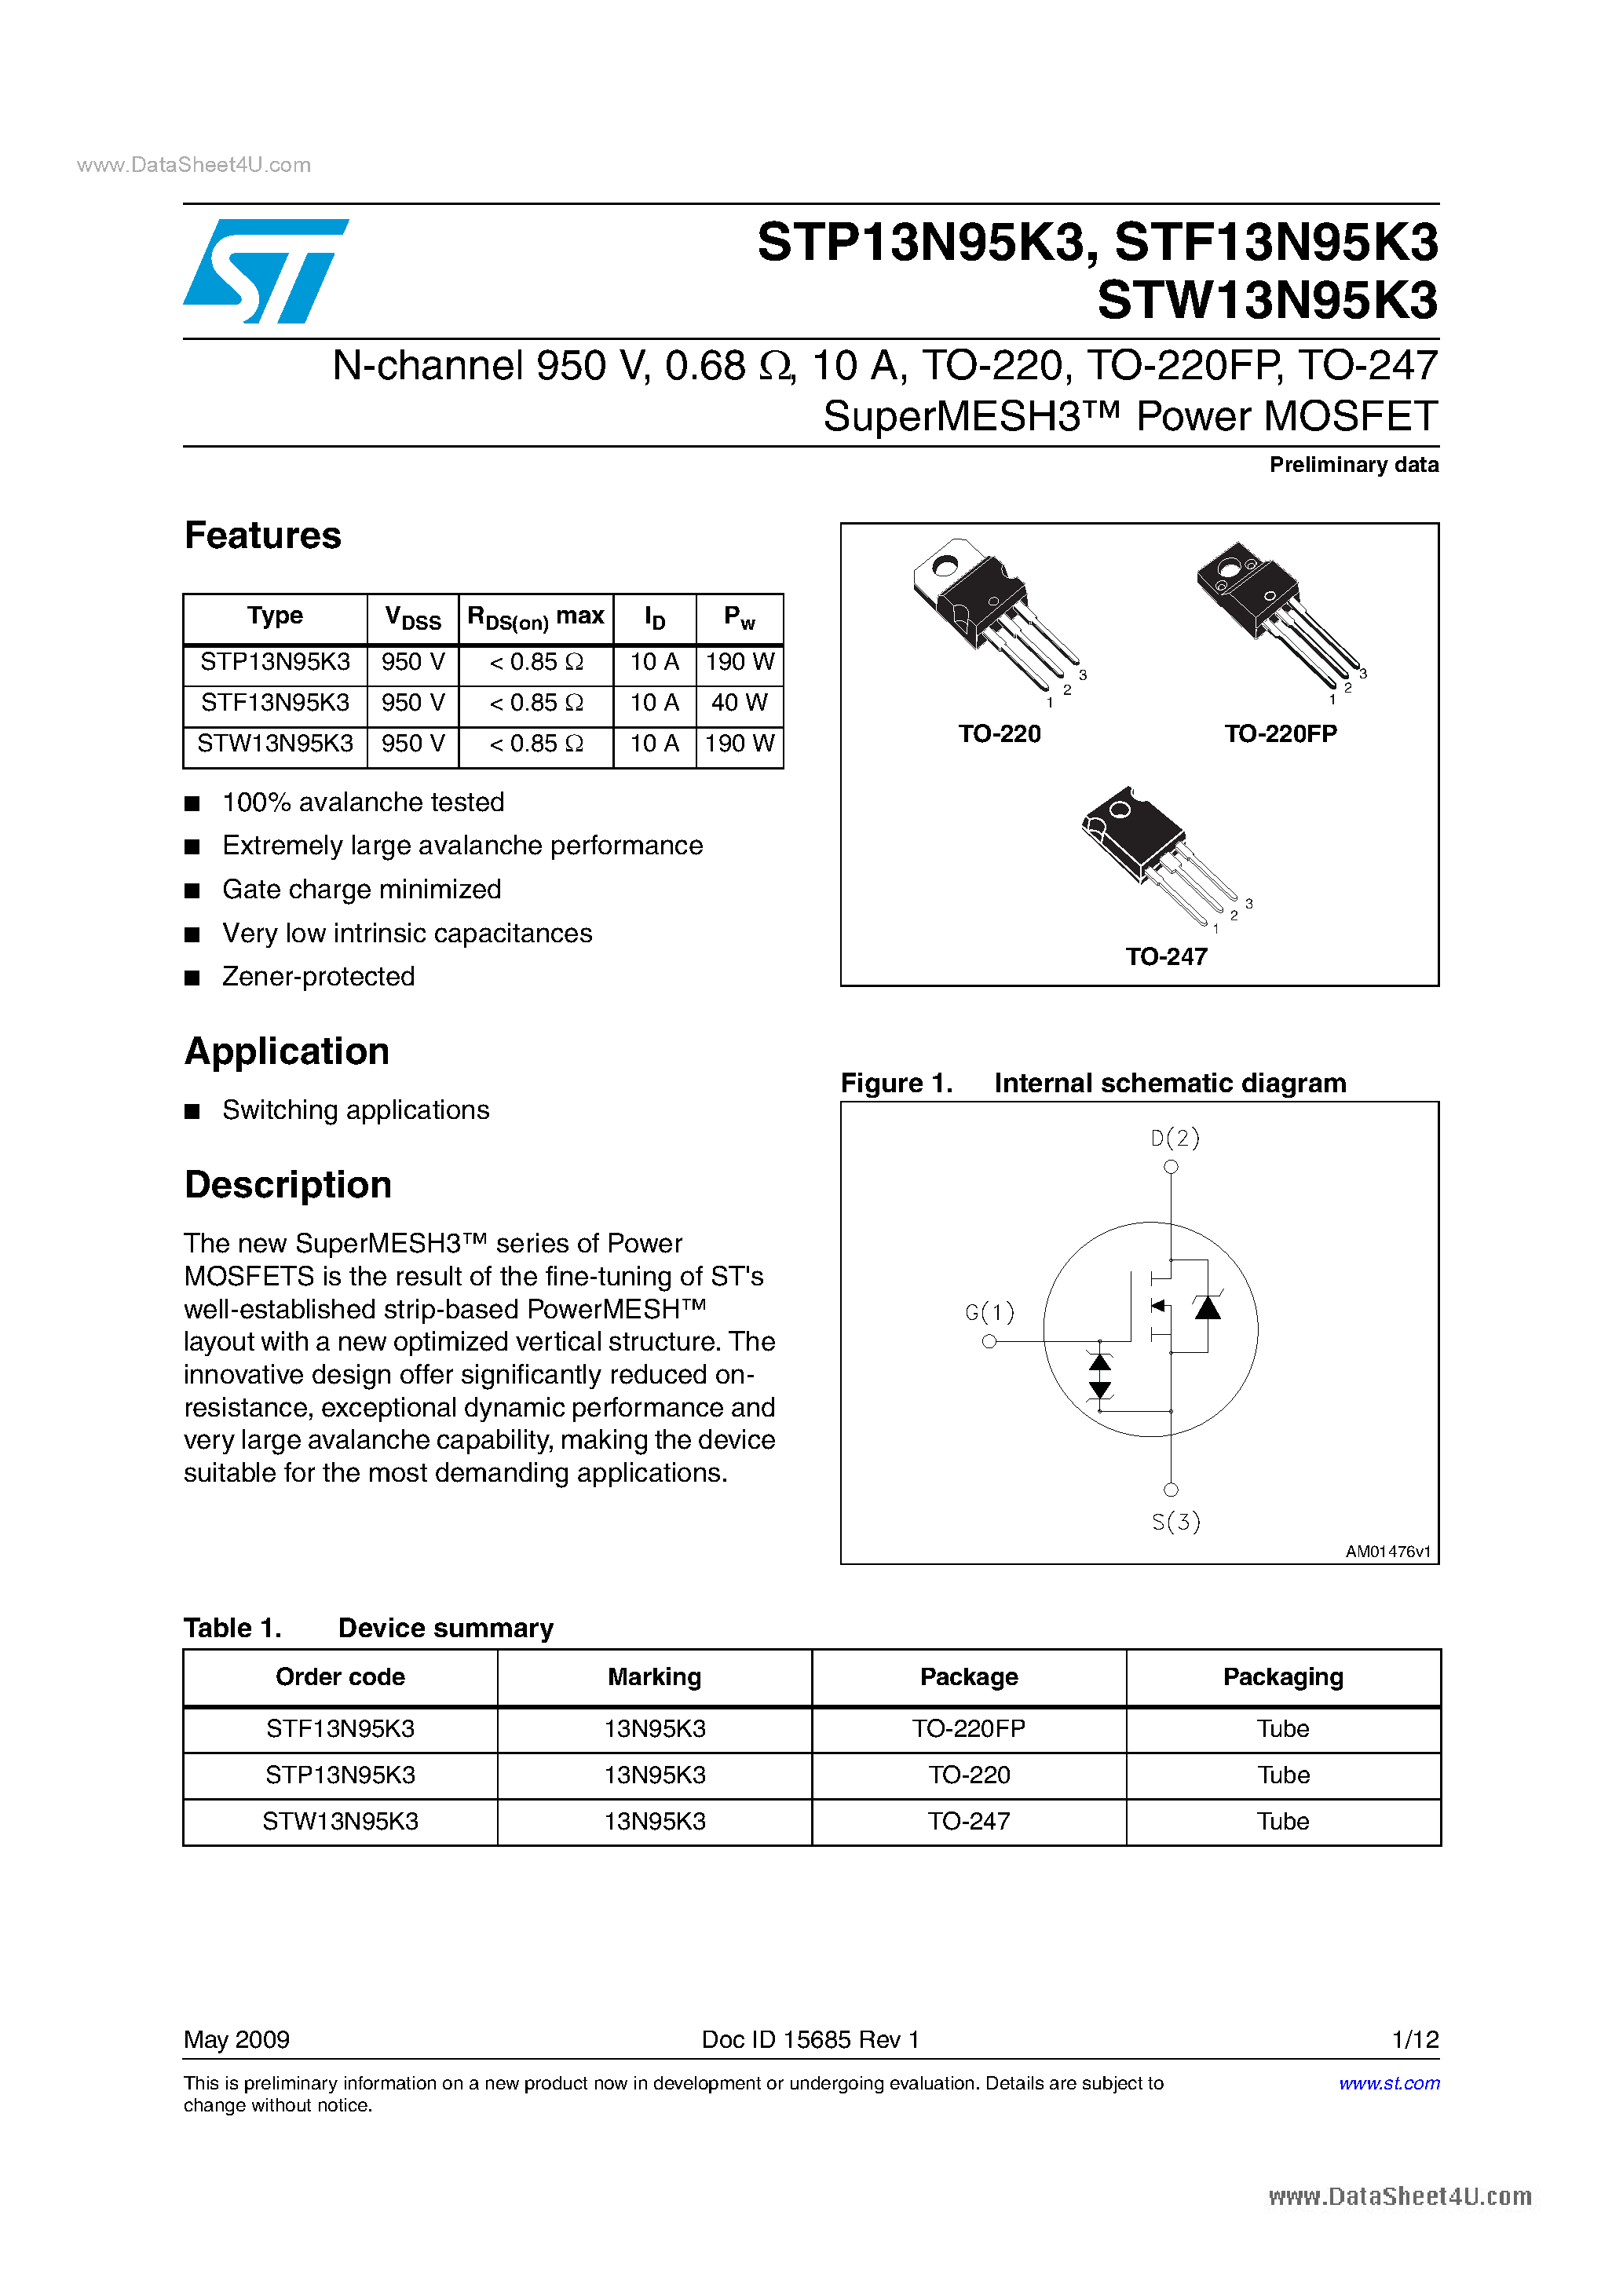 Datasheet STP13N95K3 - Power MOSFETs page 1